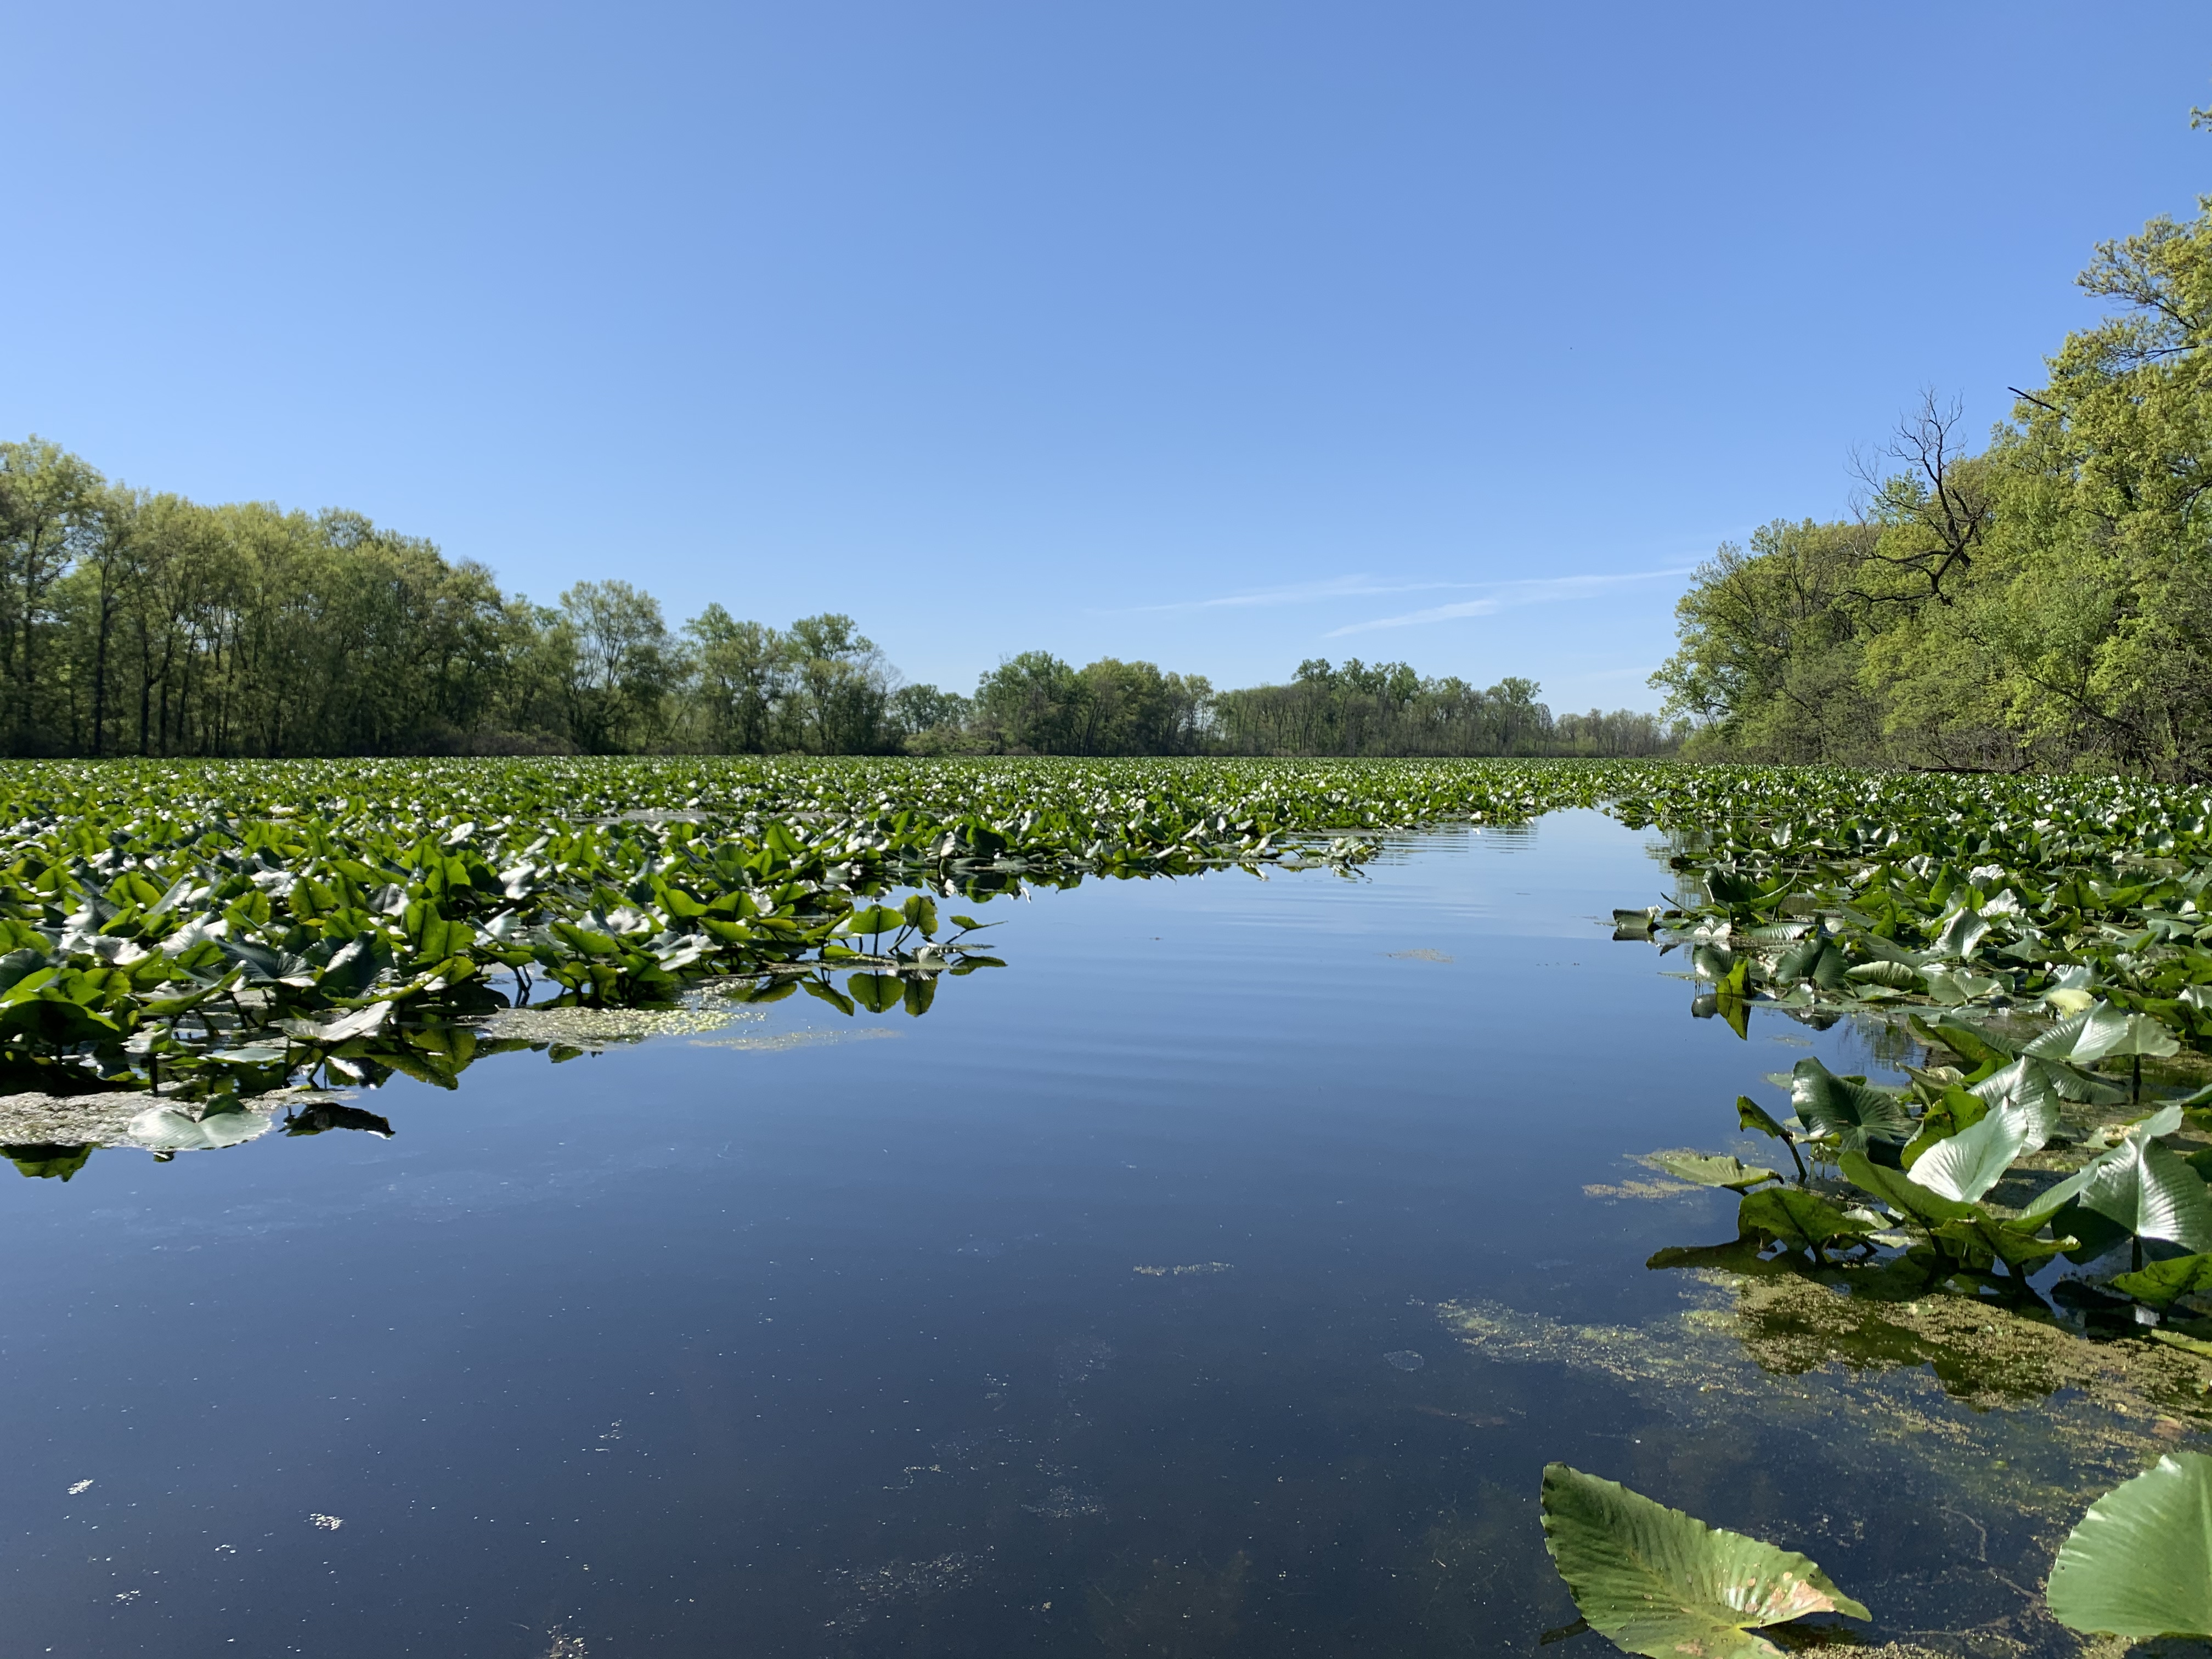 Arlington Wetlands in Madison County, Downstate Illinois